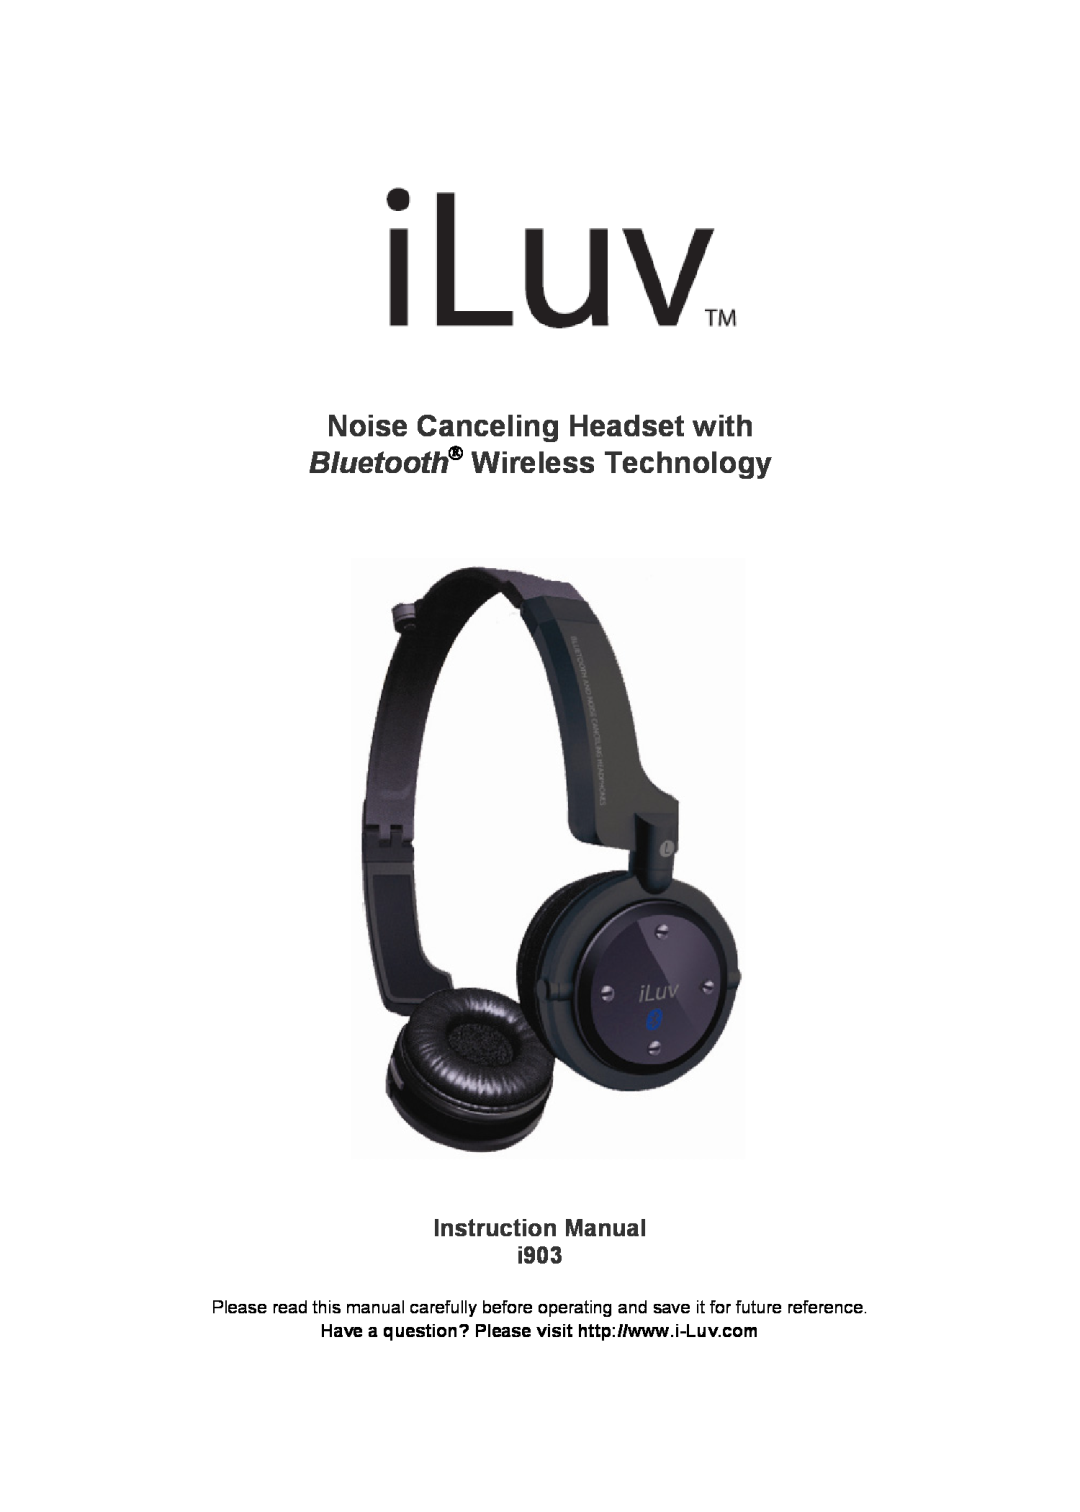 Jwin i903 instruction manual Noise Canceling Headset with, Bluetooth Wireless Technology 